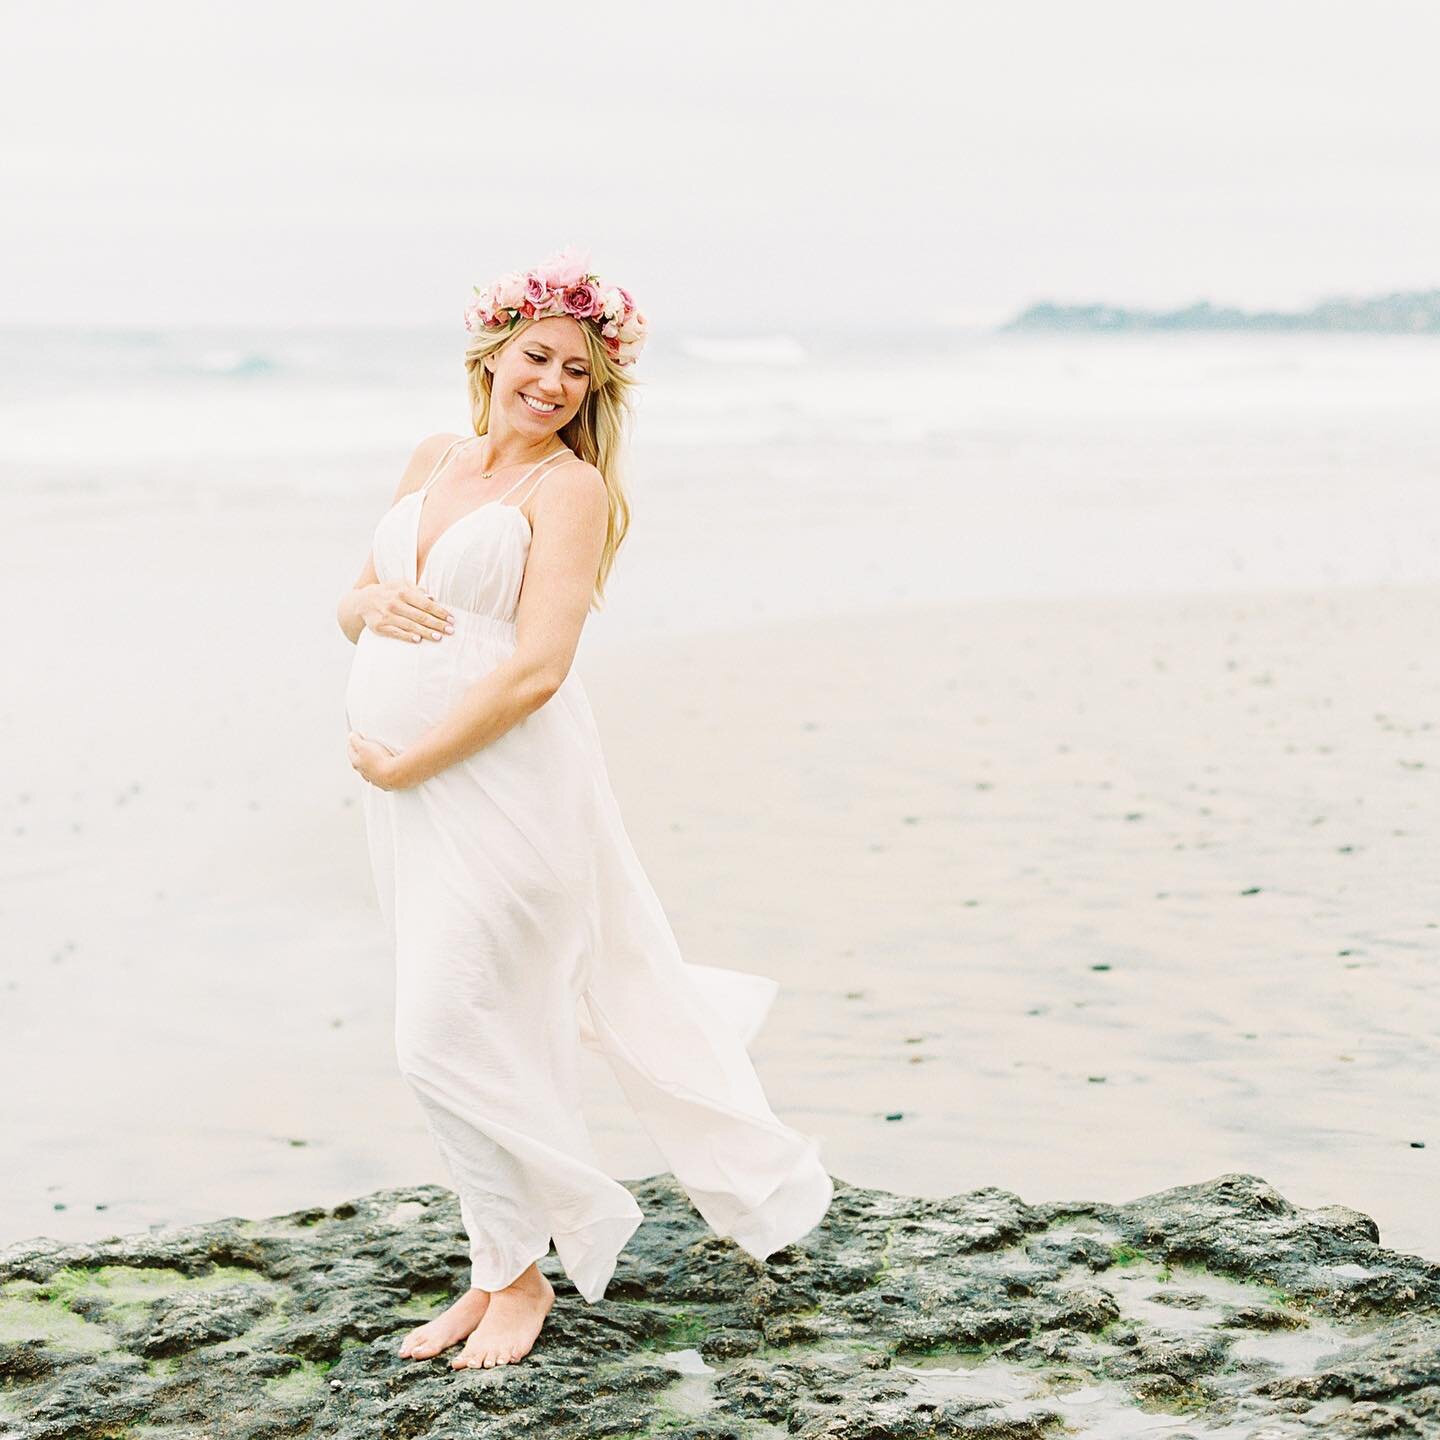 Low tides are rare so make sure when you are booking beach sessions, do your research on when the low tide days are going to be 🌊. Enjoy all the nature has to offer.

Photographer: @hellovanessarose 
Florals: @wild_and_behold_florals 

#maternitypho